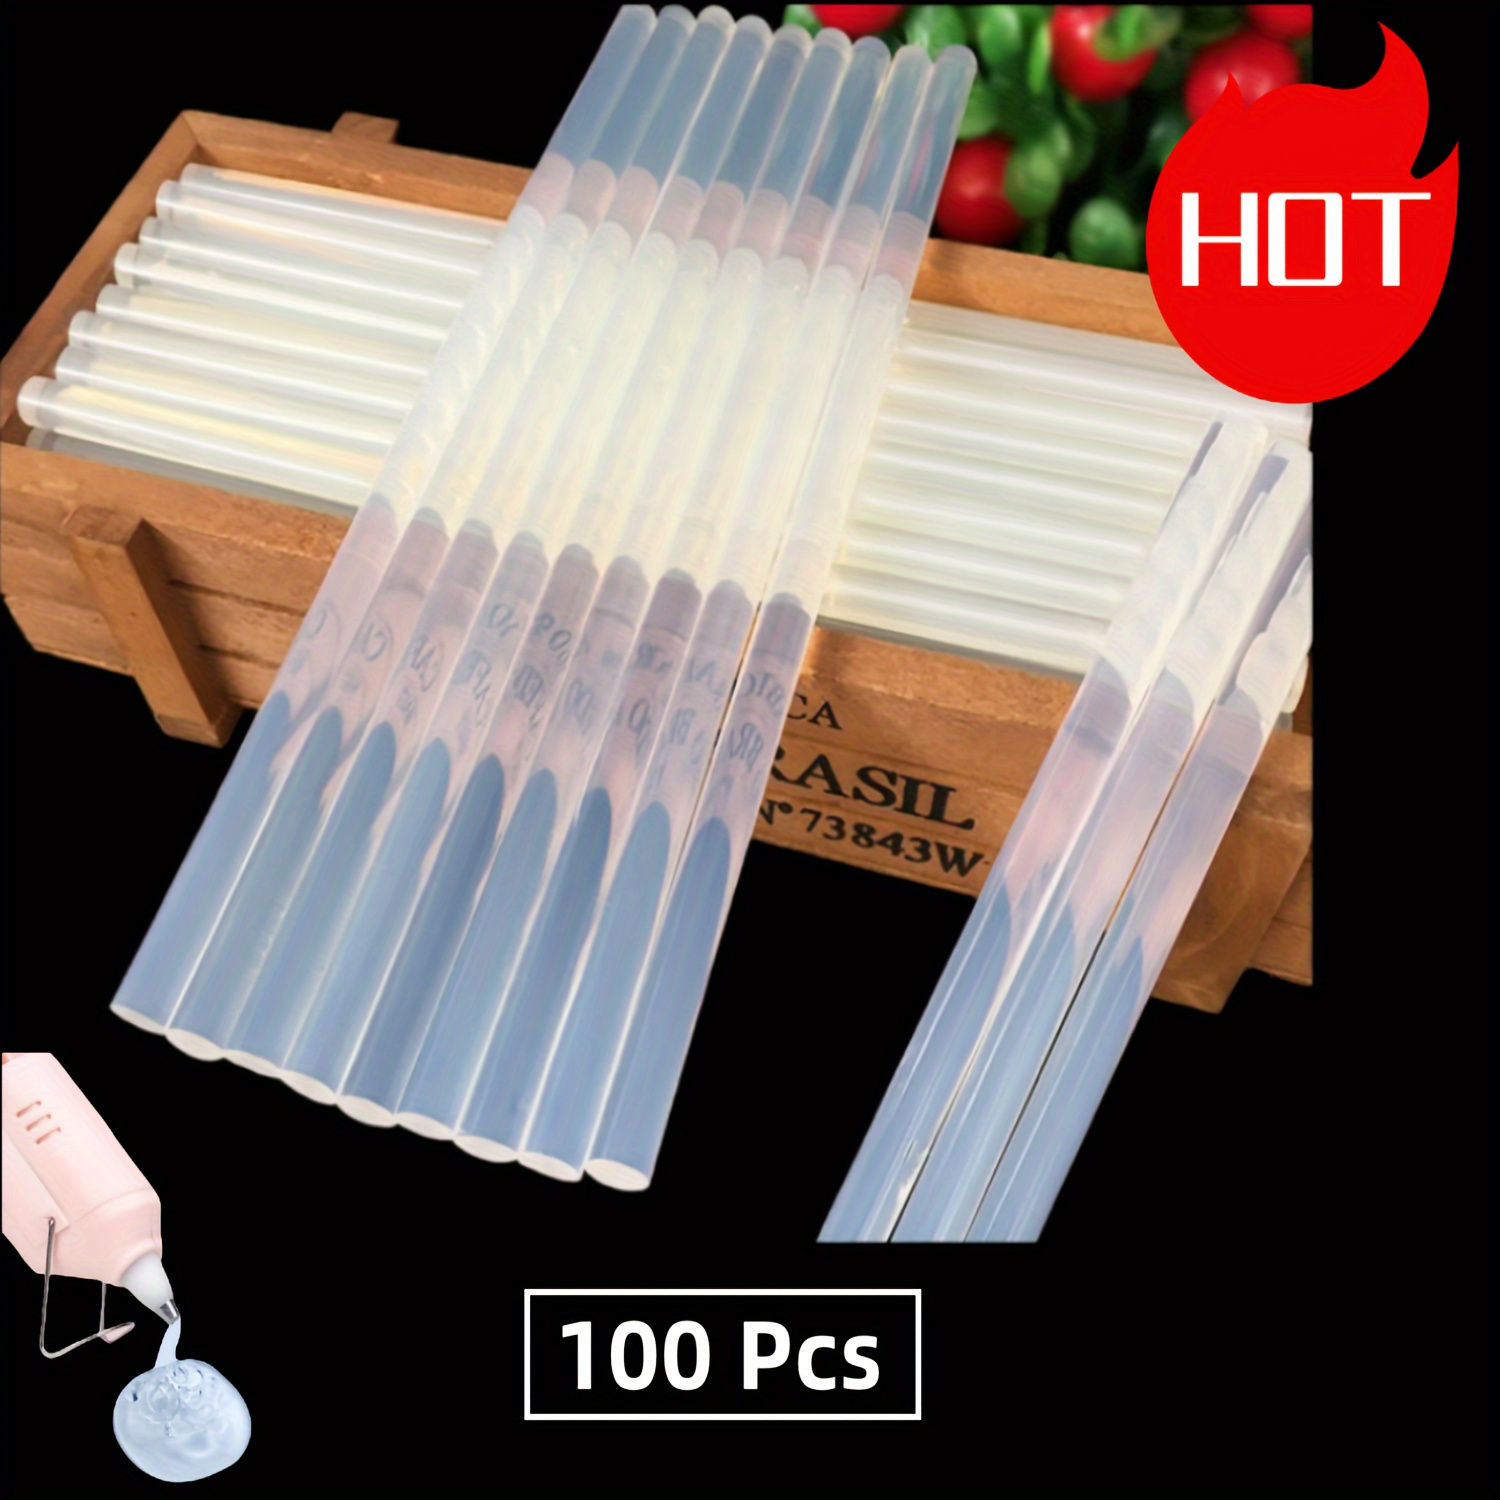 

100-piece Mini Hot Melt Glue Sticks - Ultra Clear, Strong & Non-toxic For Diy Crafts, Compatible With Most Glue Guns, Odorless & Smokeless